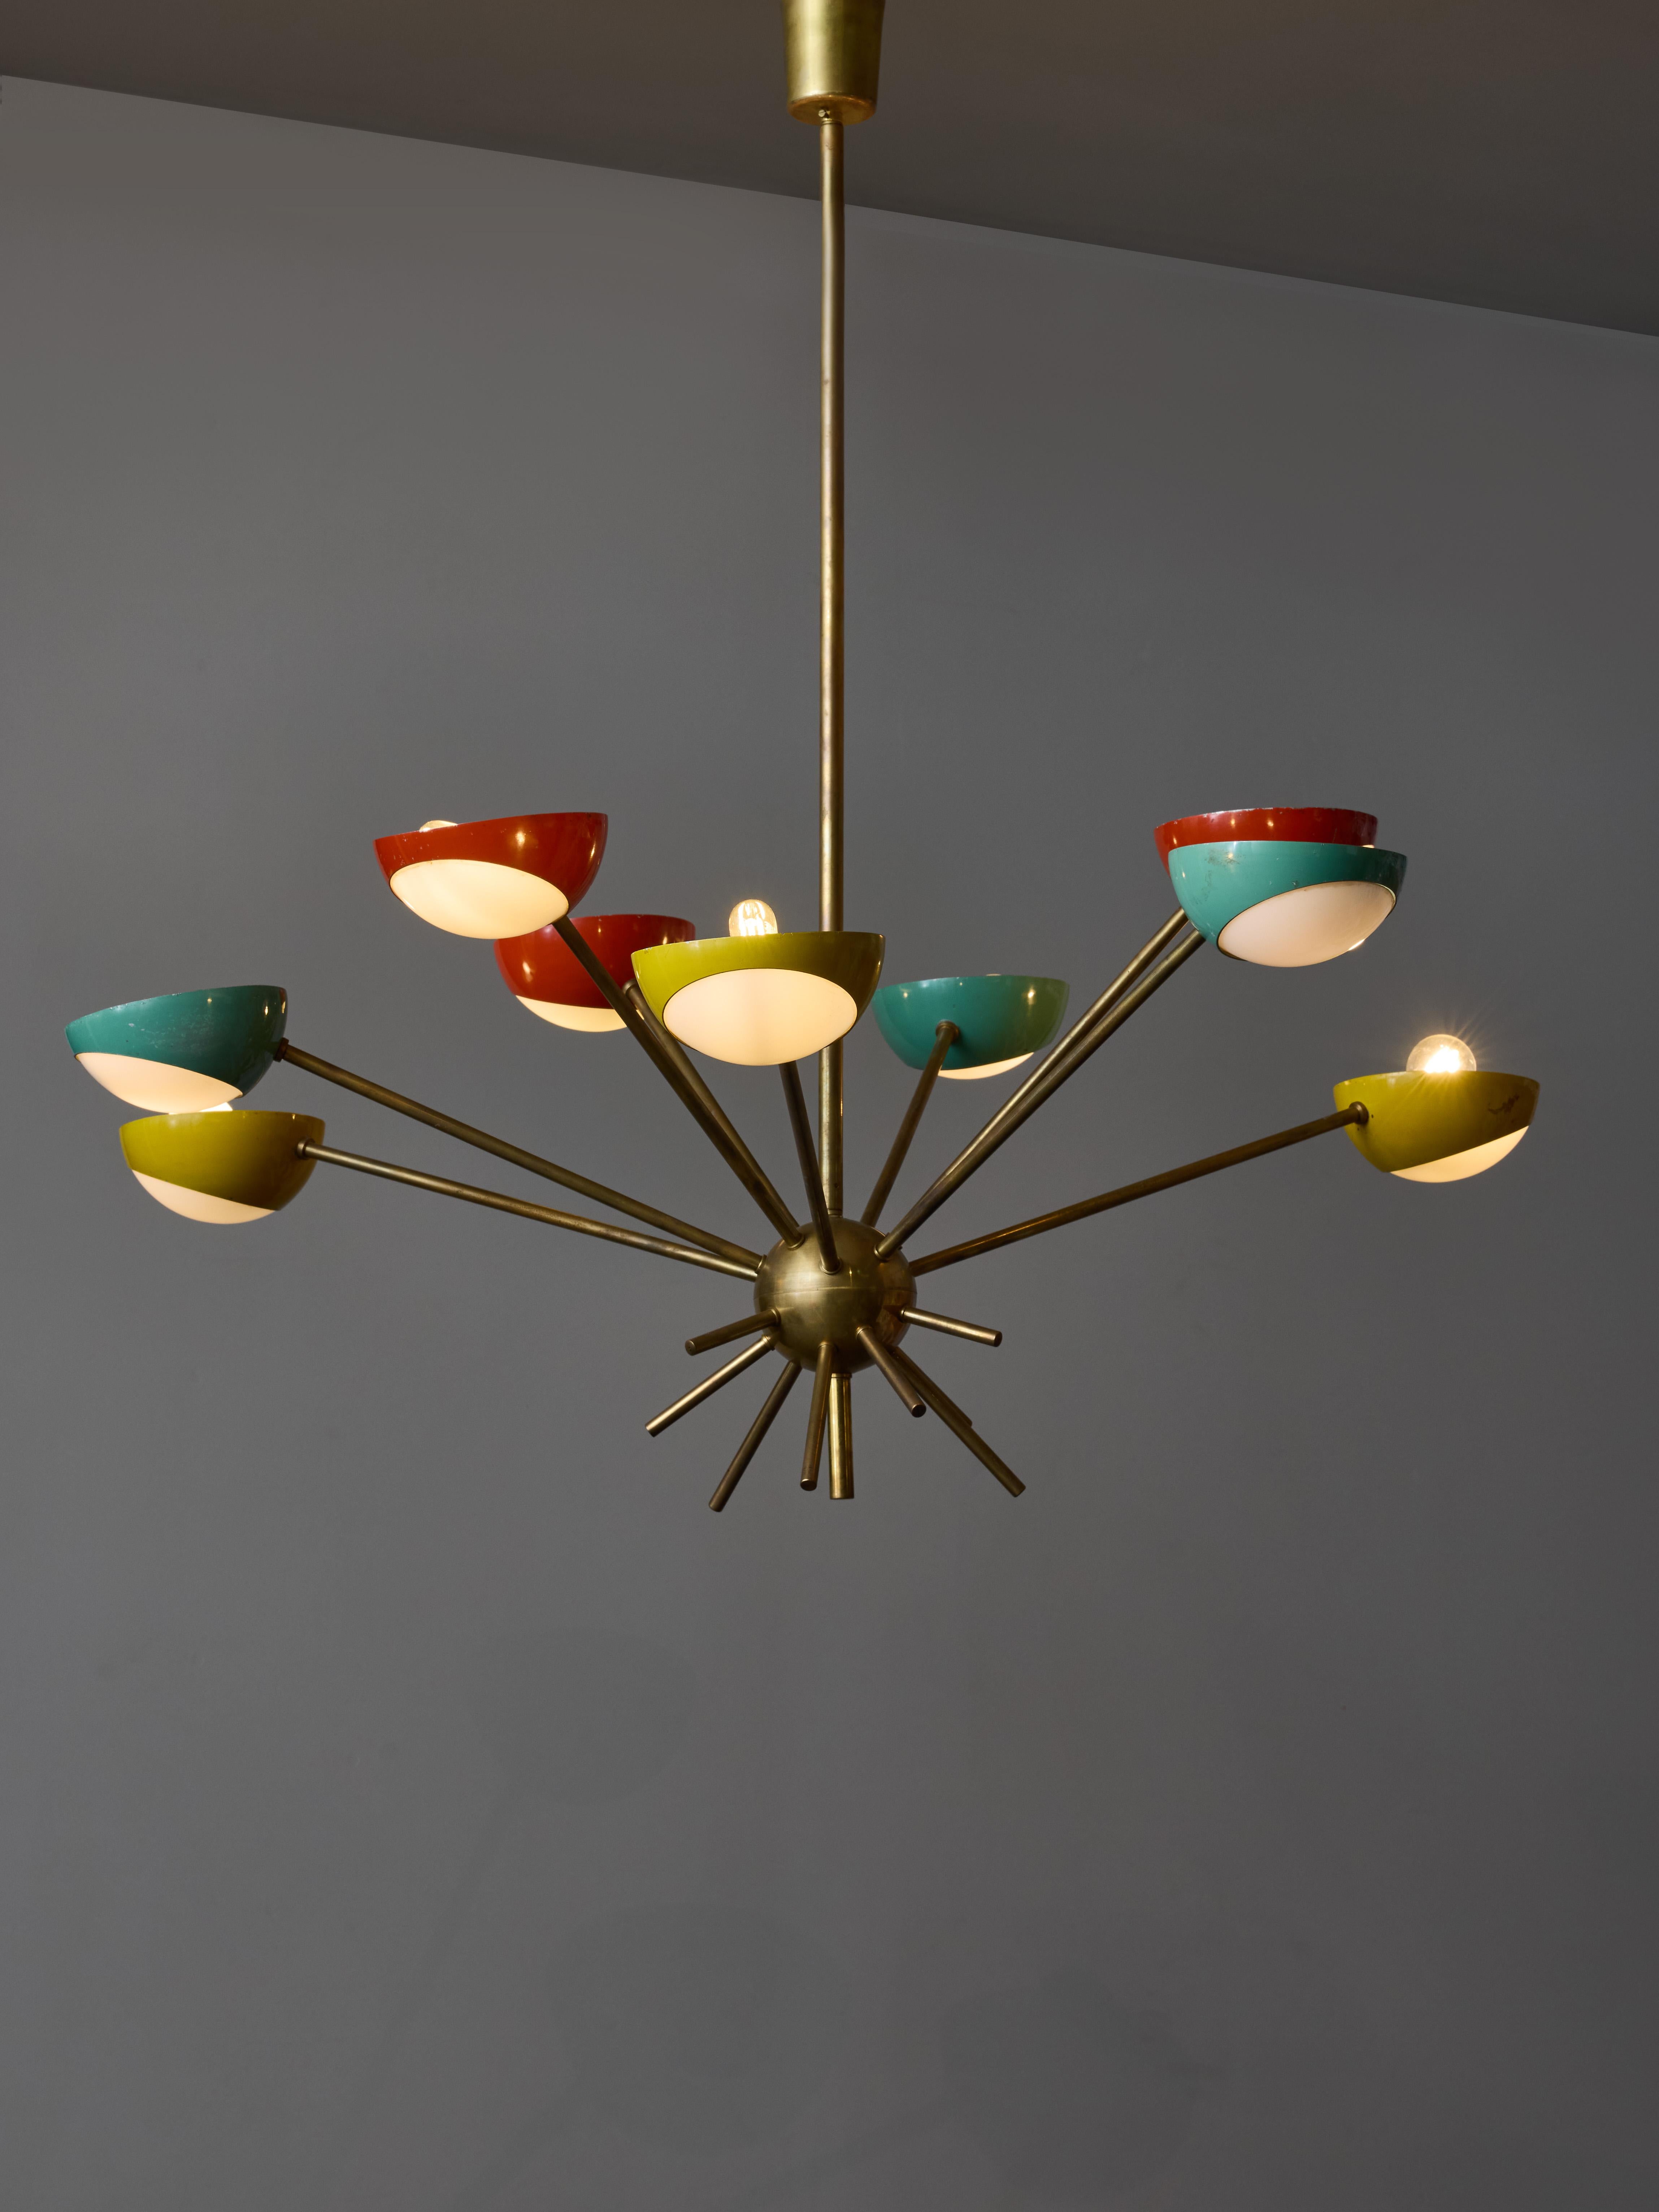 1950s chandelier made by Stilnovo, made of nine arms of light pointing upward, at different angles and lengths. The arms end with enameled colourful cups holding opaline glass curved diffusers.

Original stamp on the stem